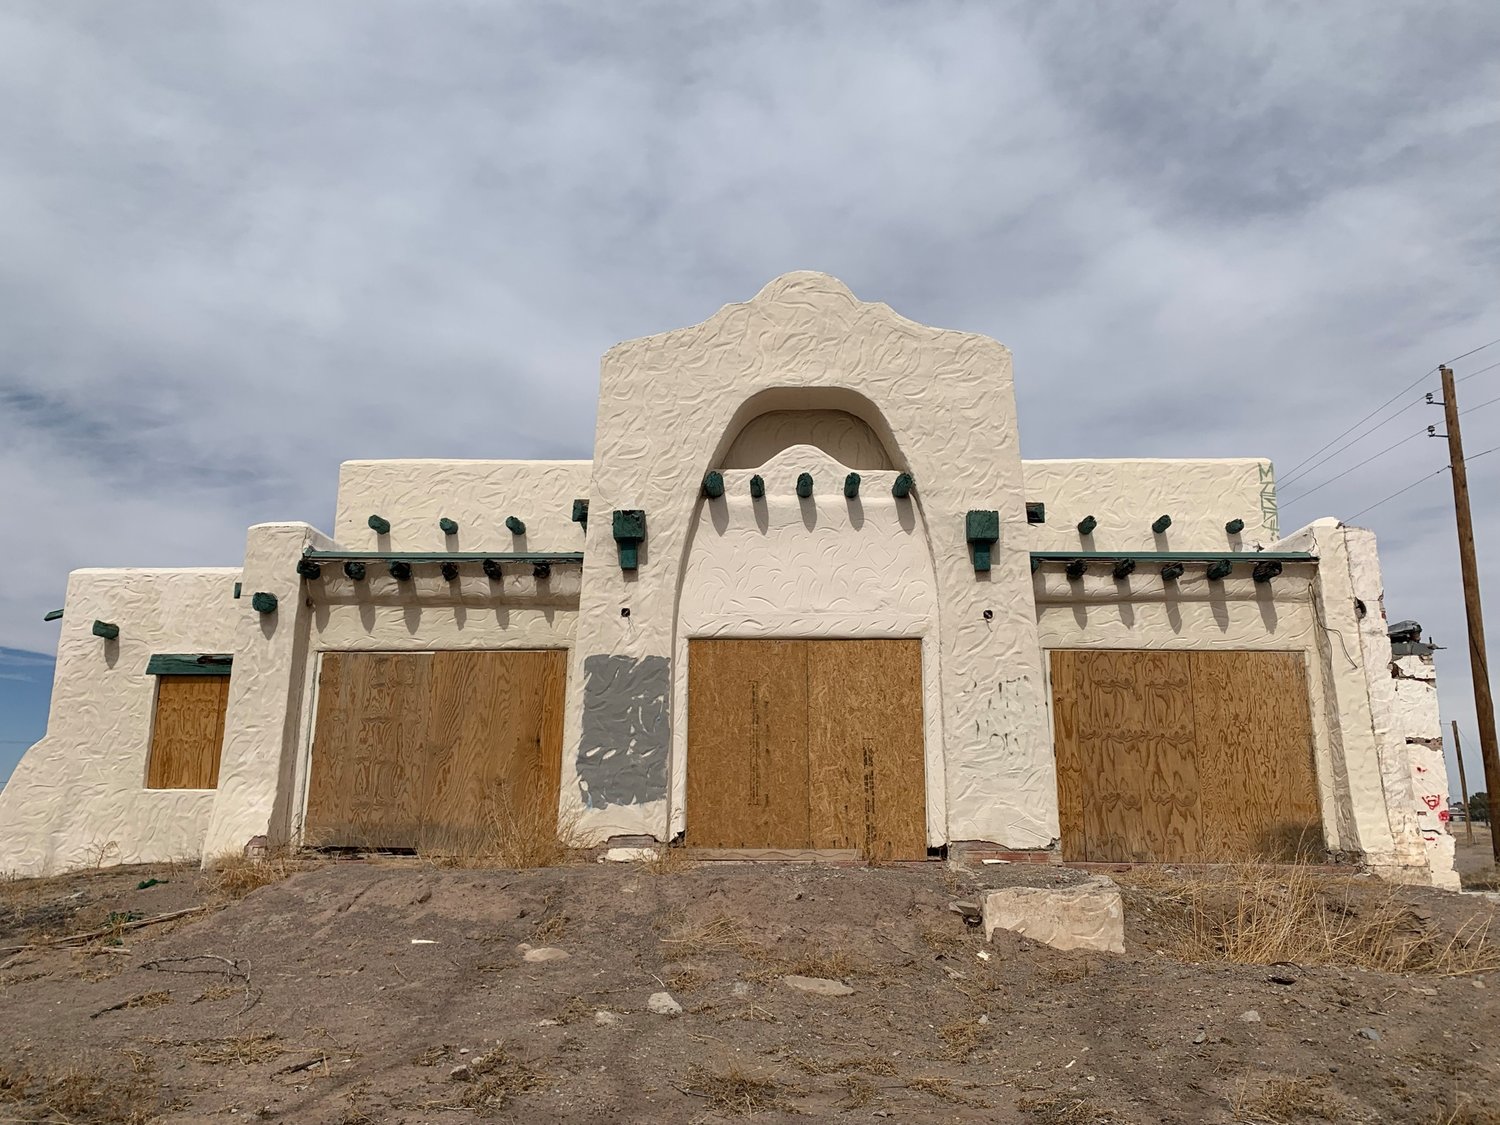 The Las Cruces Country Club clubhouse, originally designed in 1929 by Henry Trost has been the source of debate regarding its demolition.